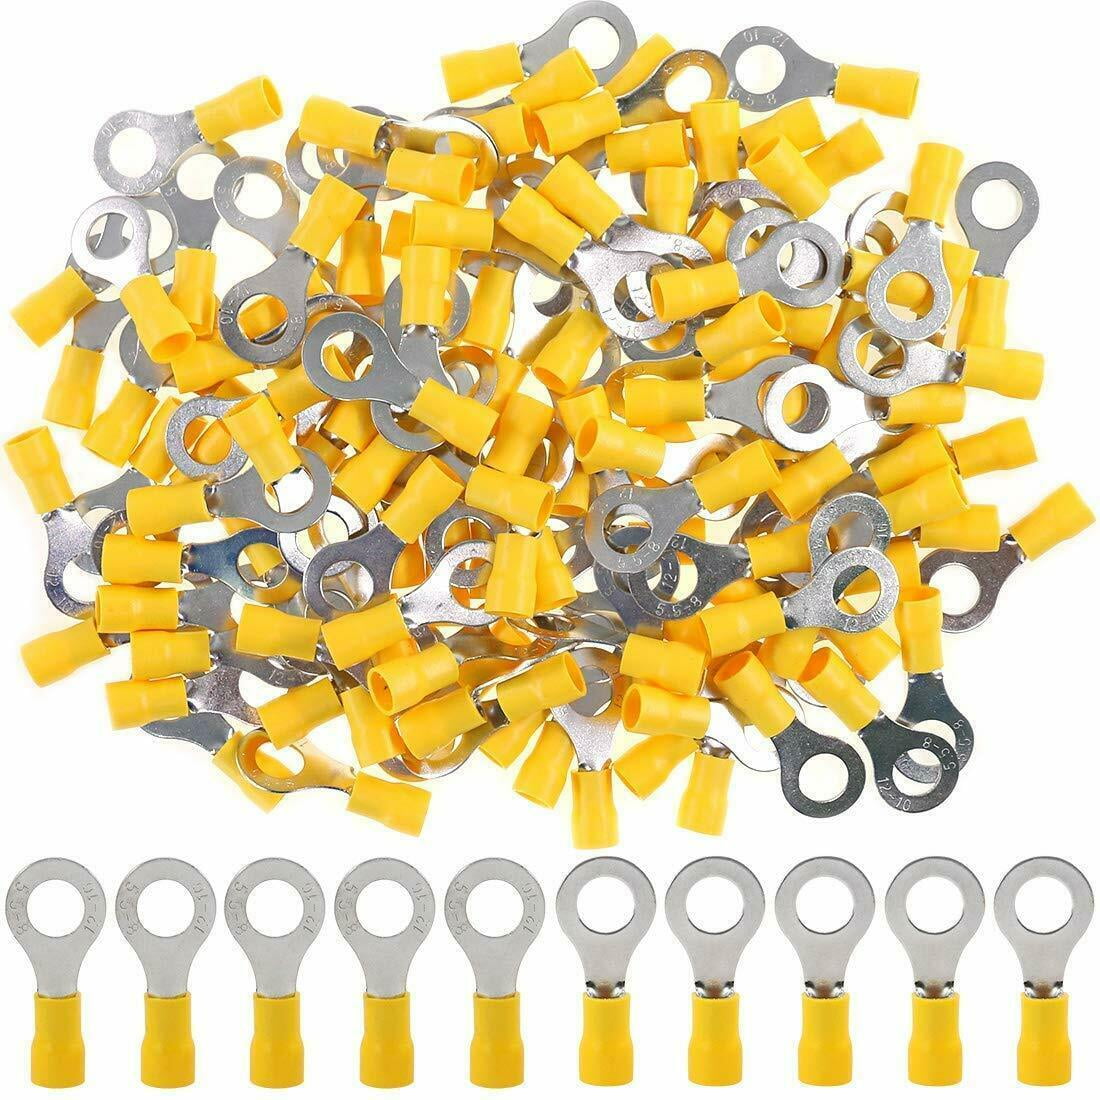 100Pcs 12-10AWG Insulated Ring Terminals Electrical Wire Crimp Connectors Yellow